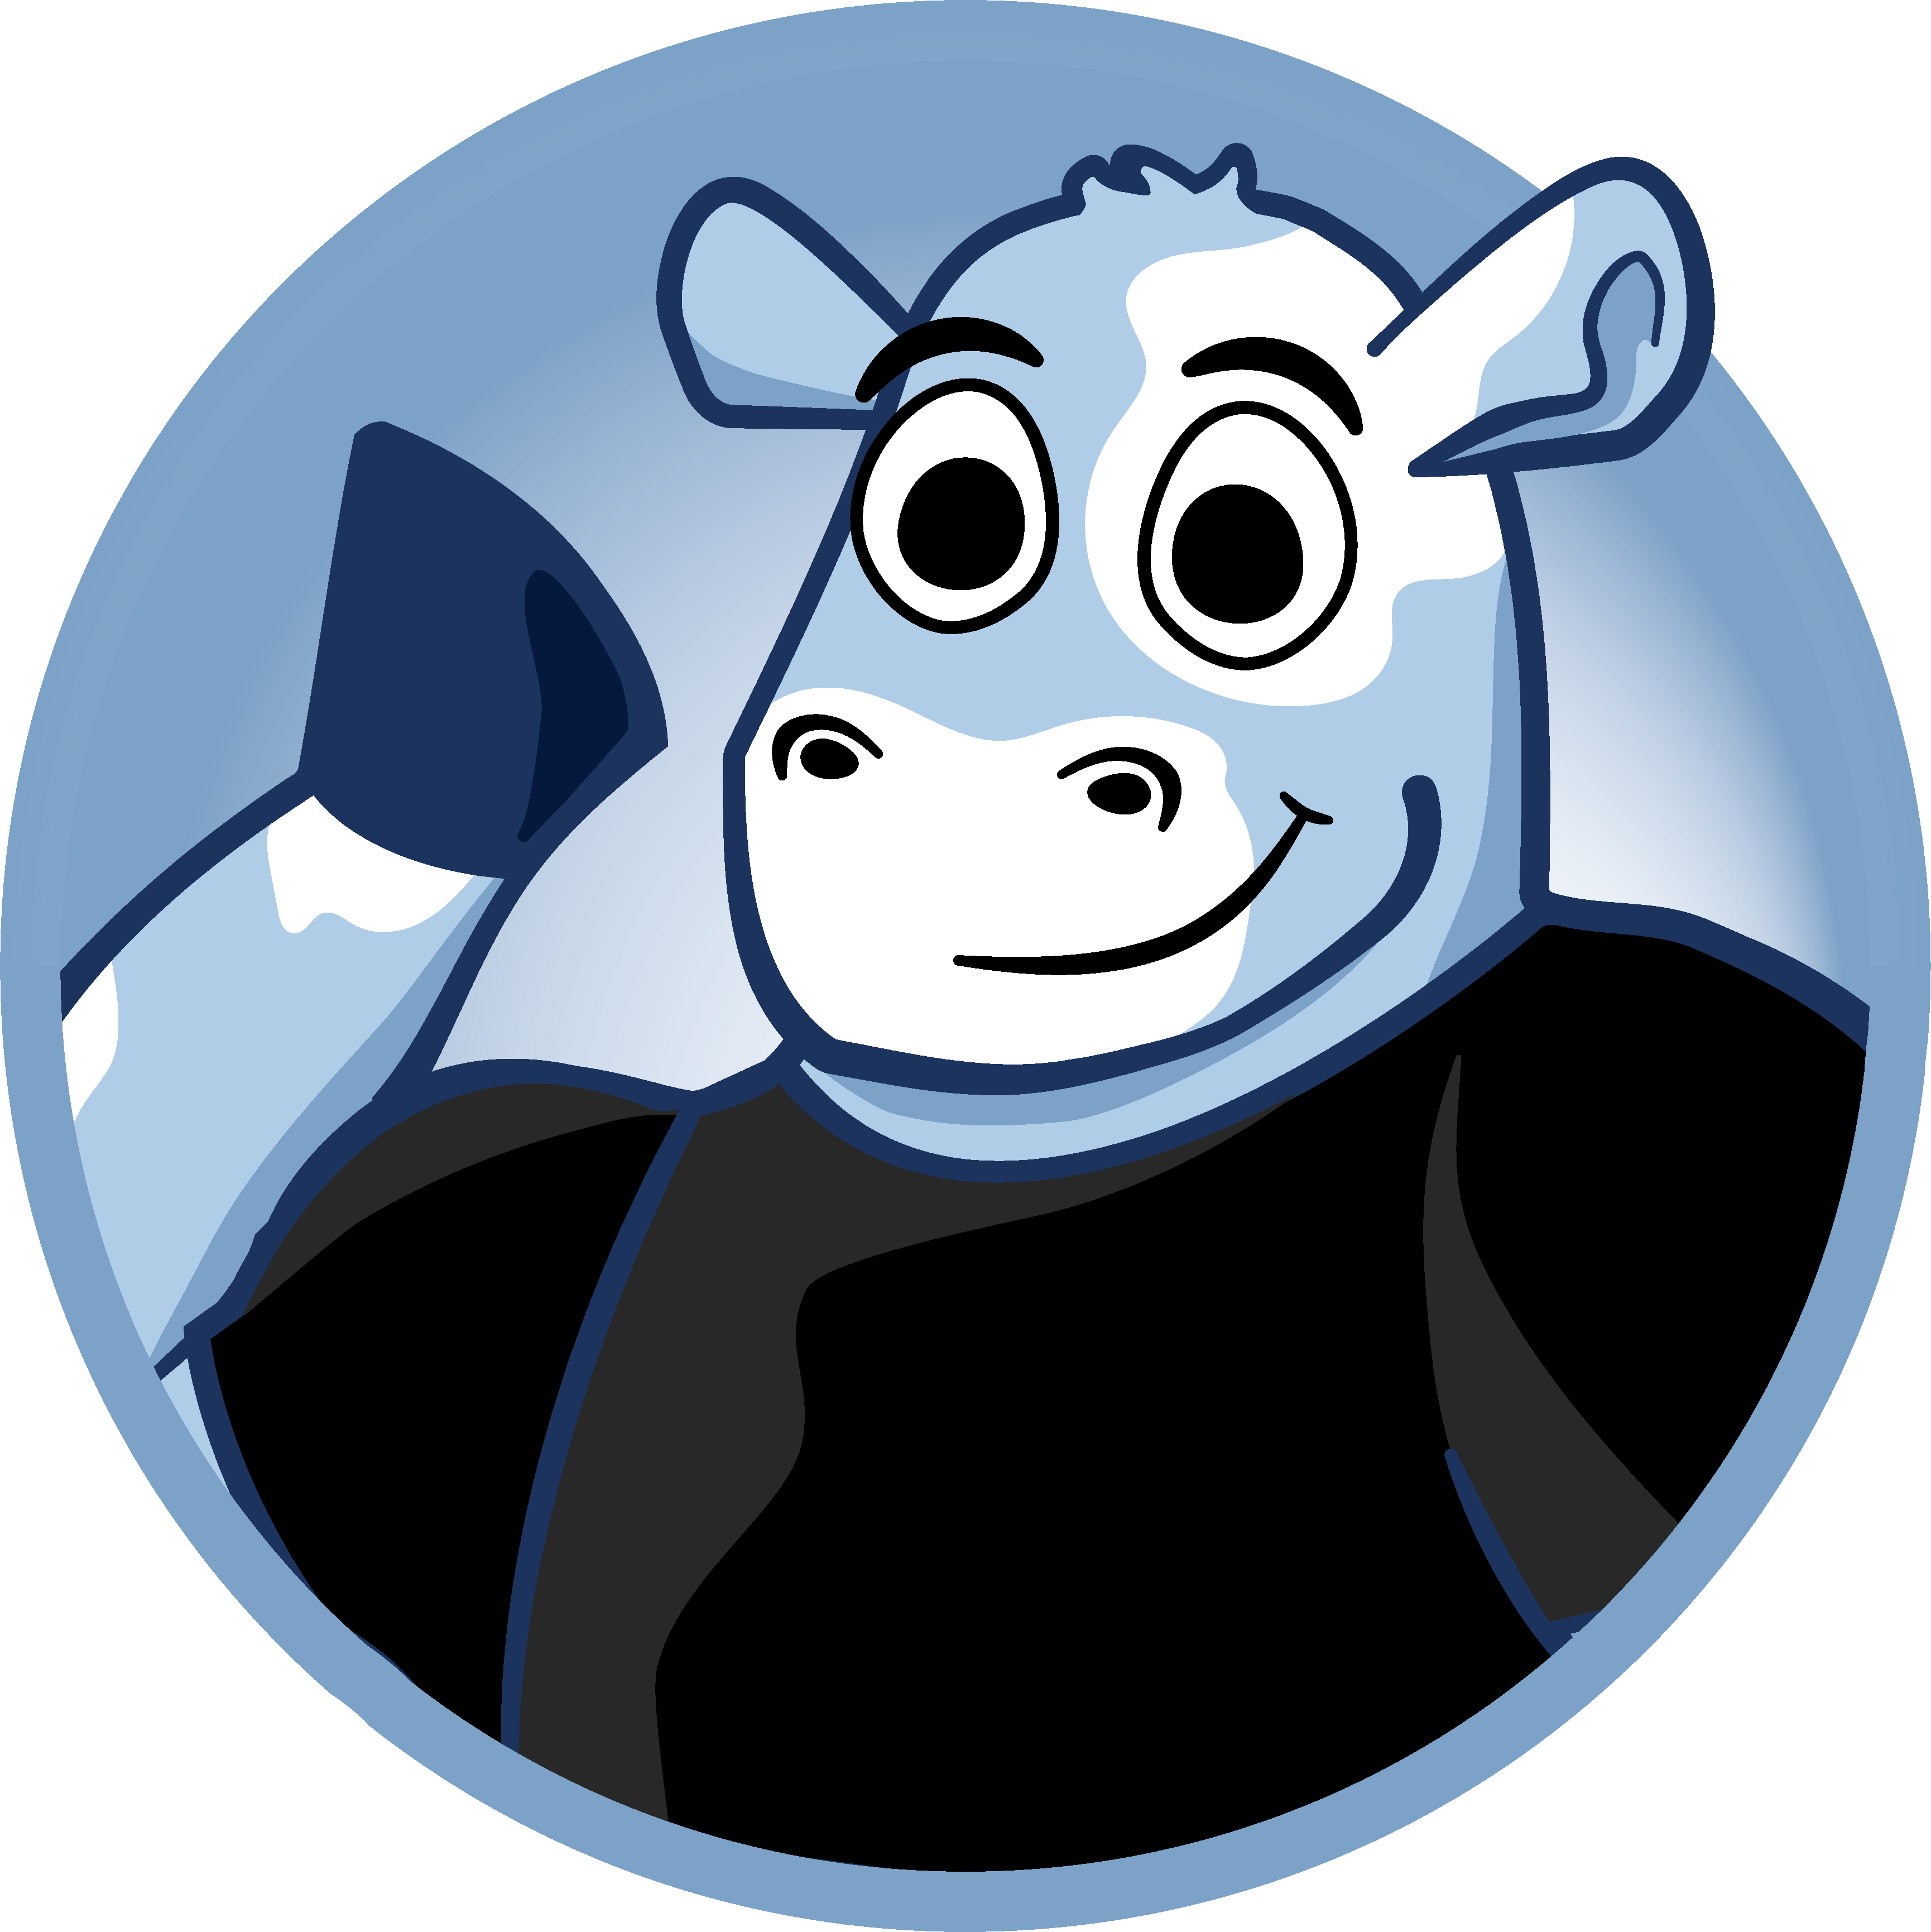 Blue Cow Moving & Storage